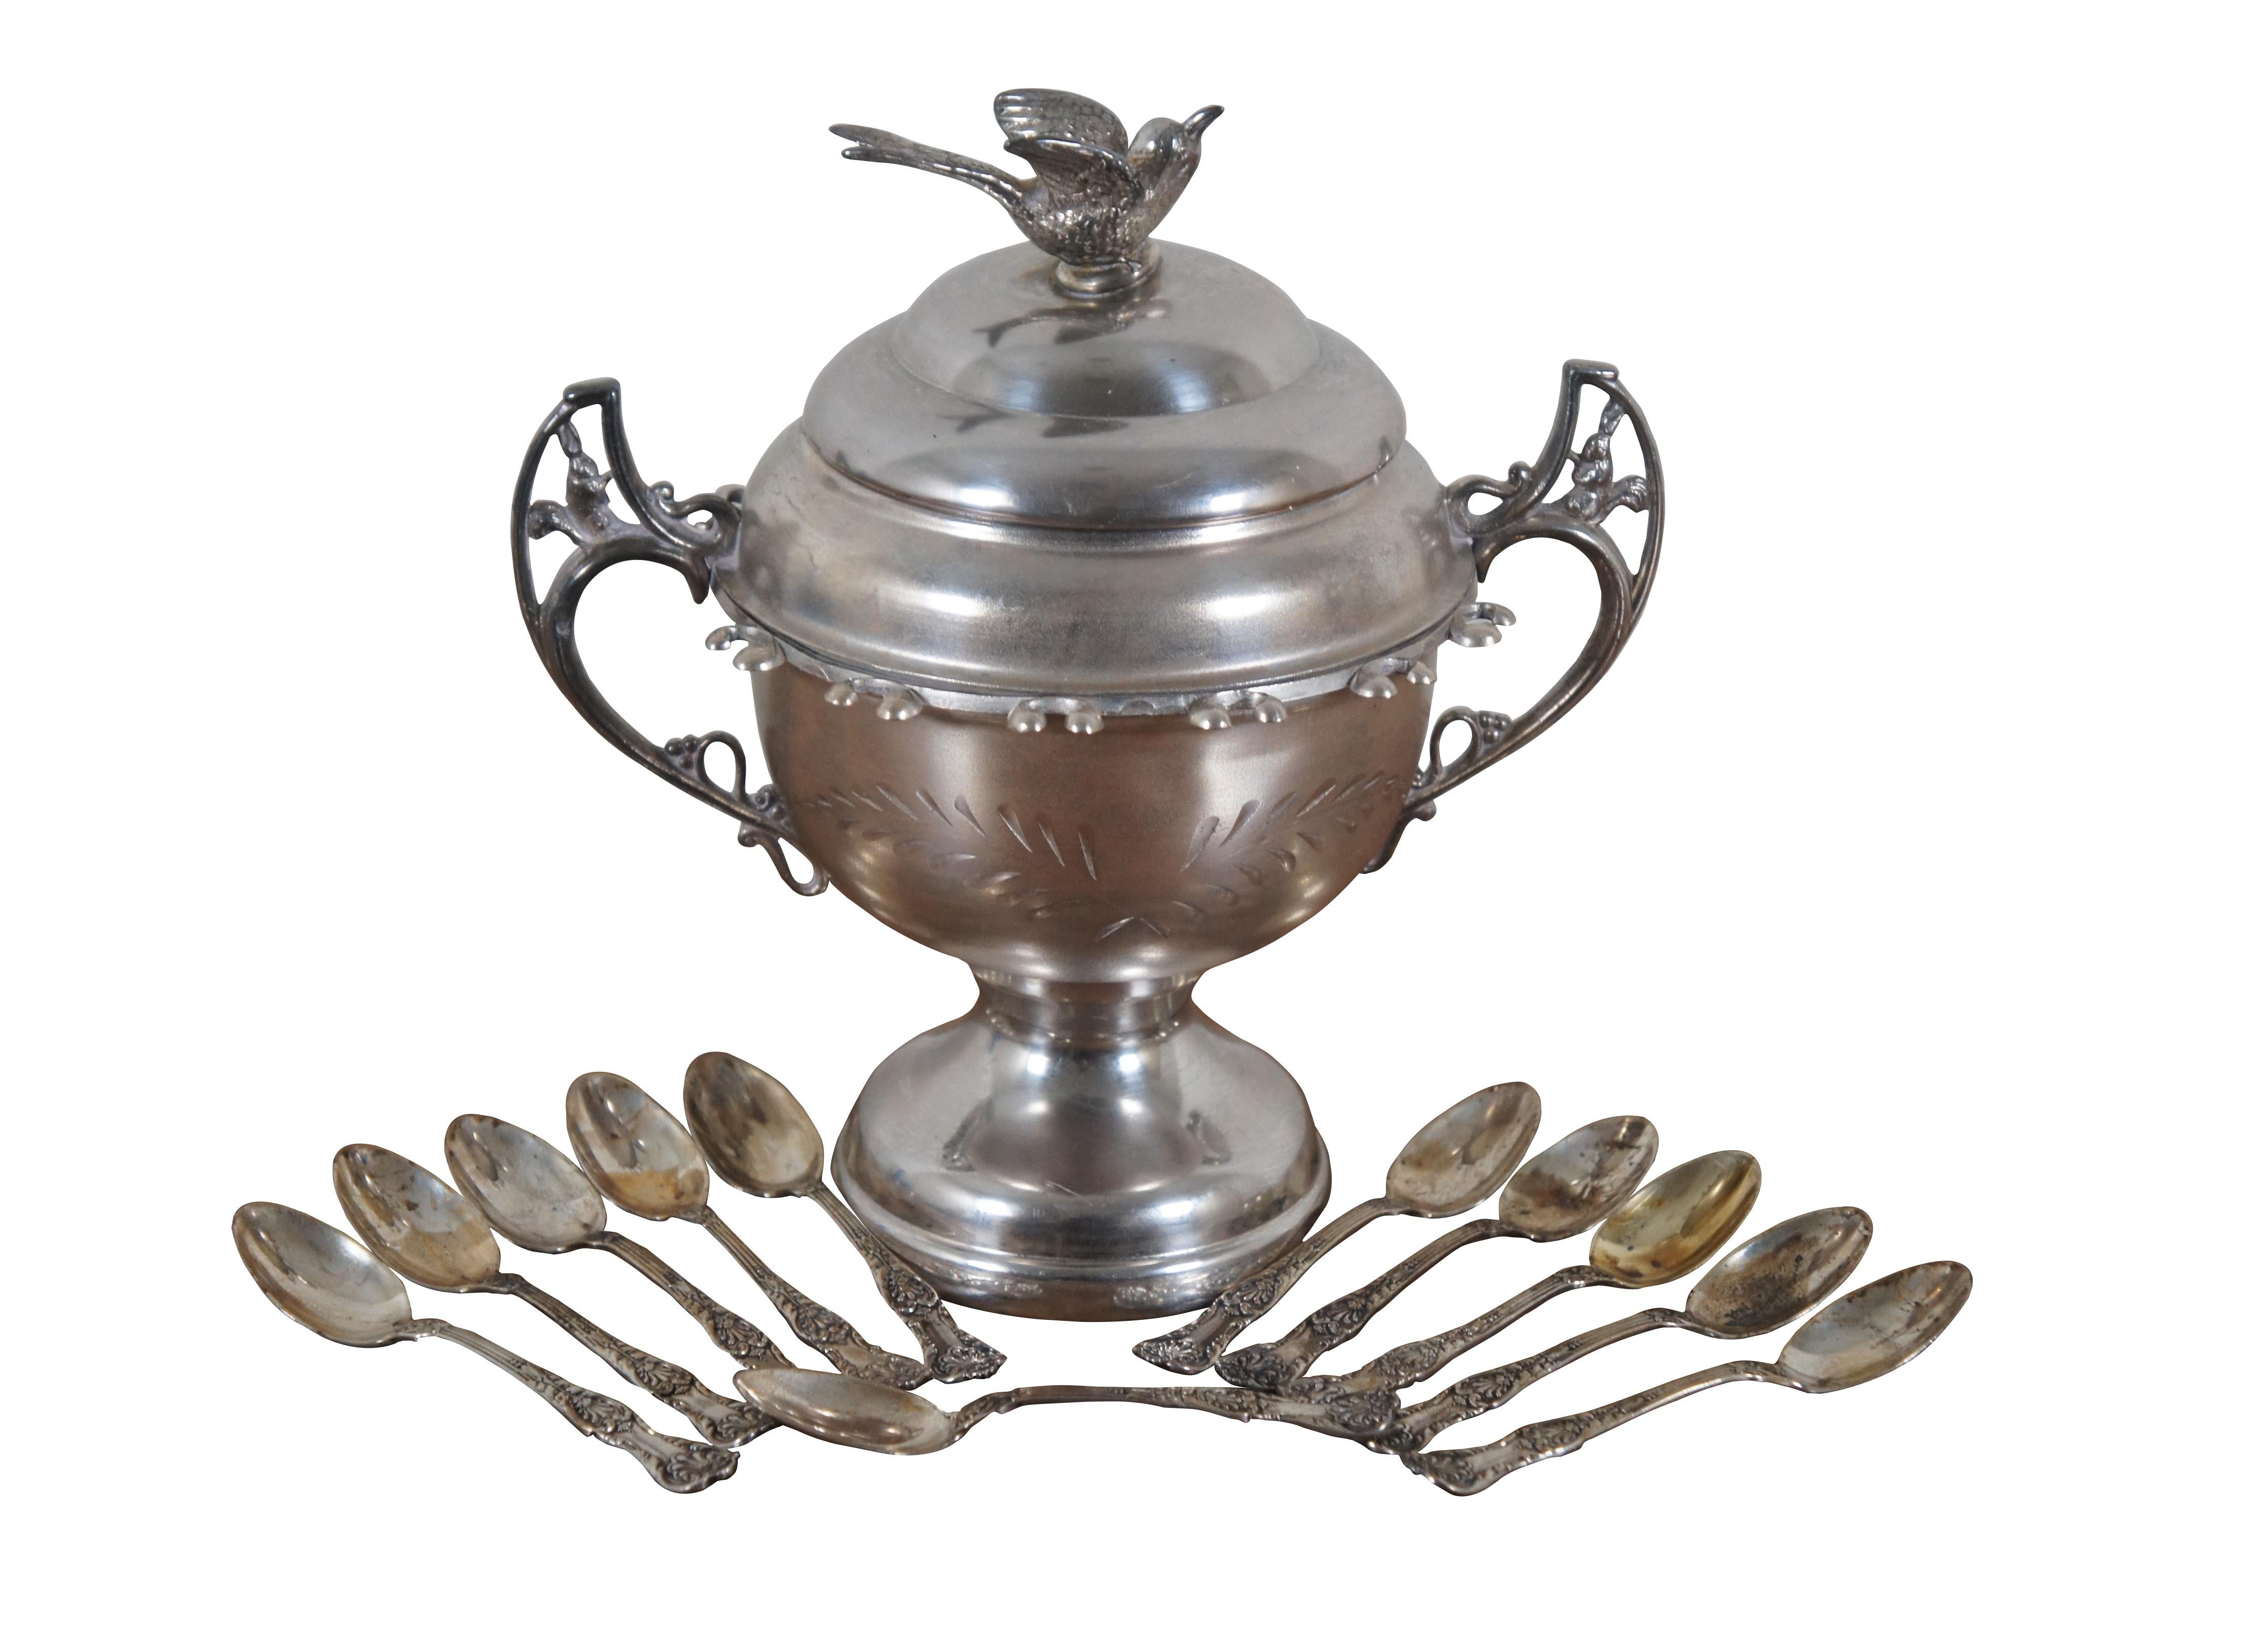 Antique turn of the century 13 piece sugar bowl and hanging spoon set, featuring a trophy urn style bowl with etched palm leaves on the body, brackets to support twelve sugar spoons, squirrels in the pierced handles and a sparrow shaped finial. Set